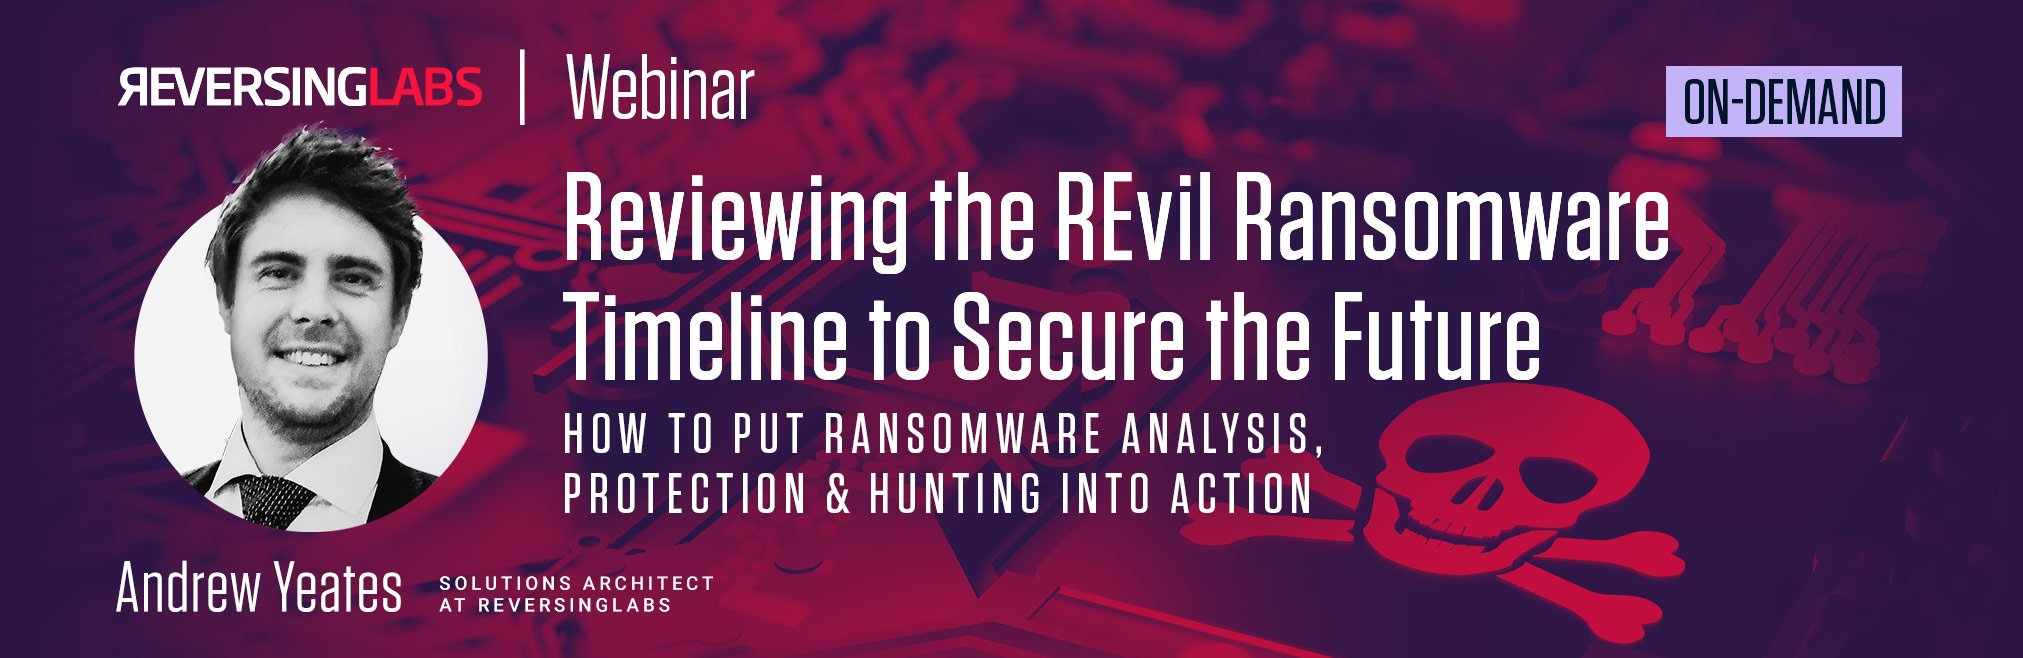 Reviewing the REvil Ransomware Timeline to Secure the Future